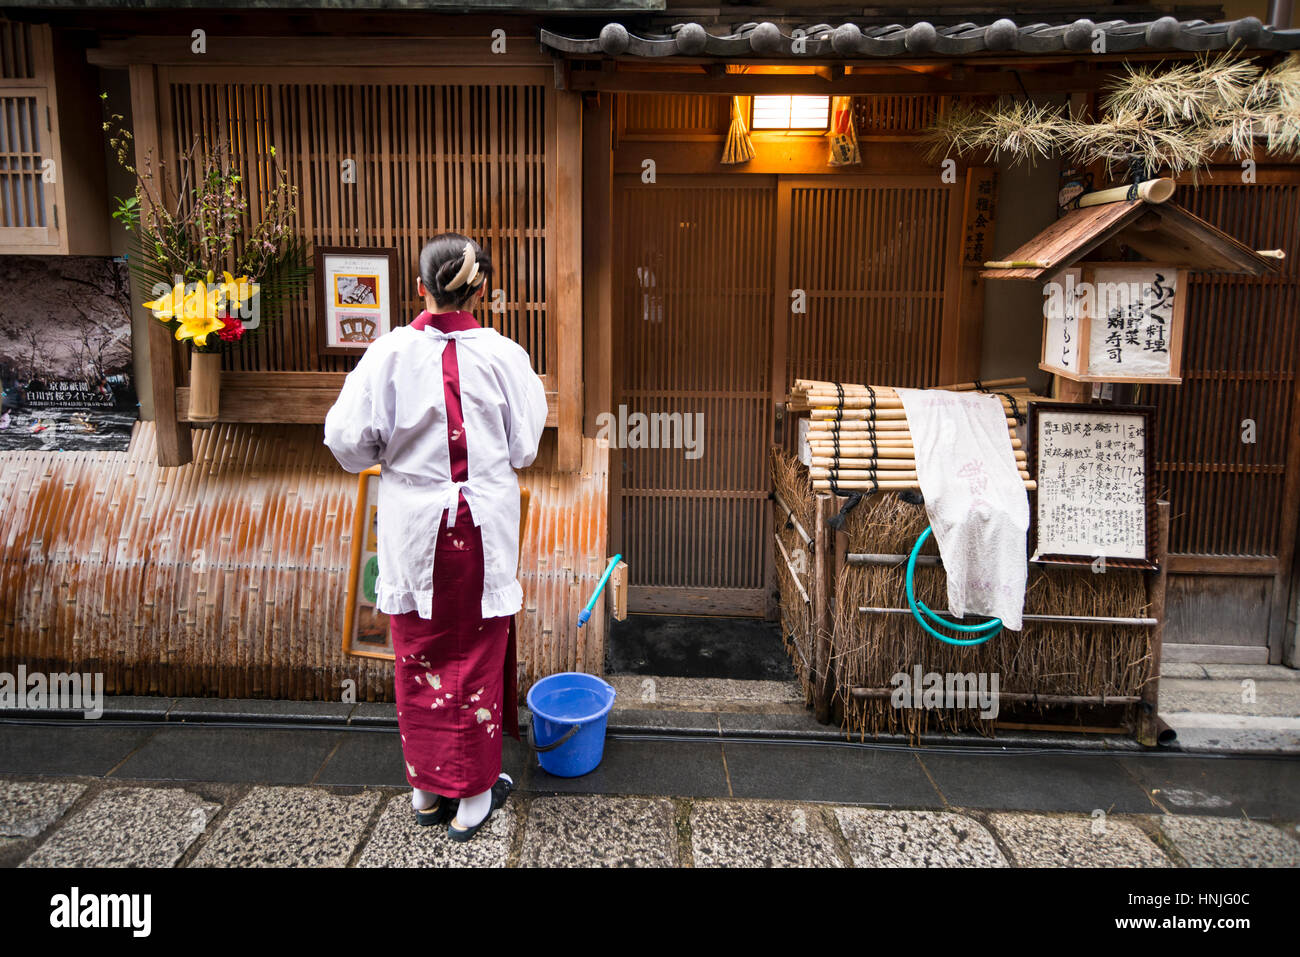 A female worker cleaning entrance of restaurant before opening, Gion District, Kyoto, Japan Stock Photo